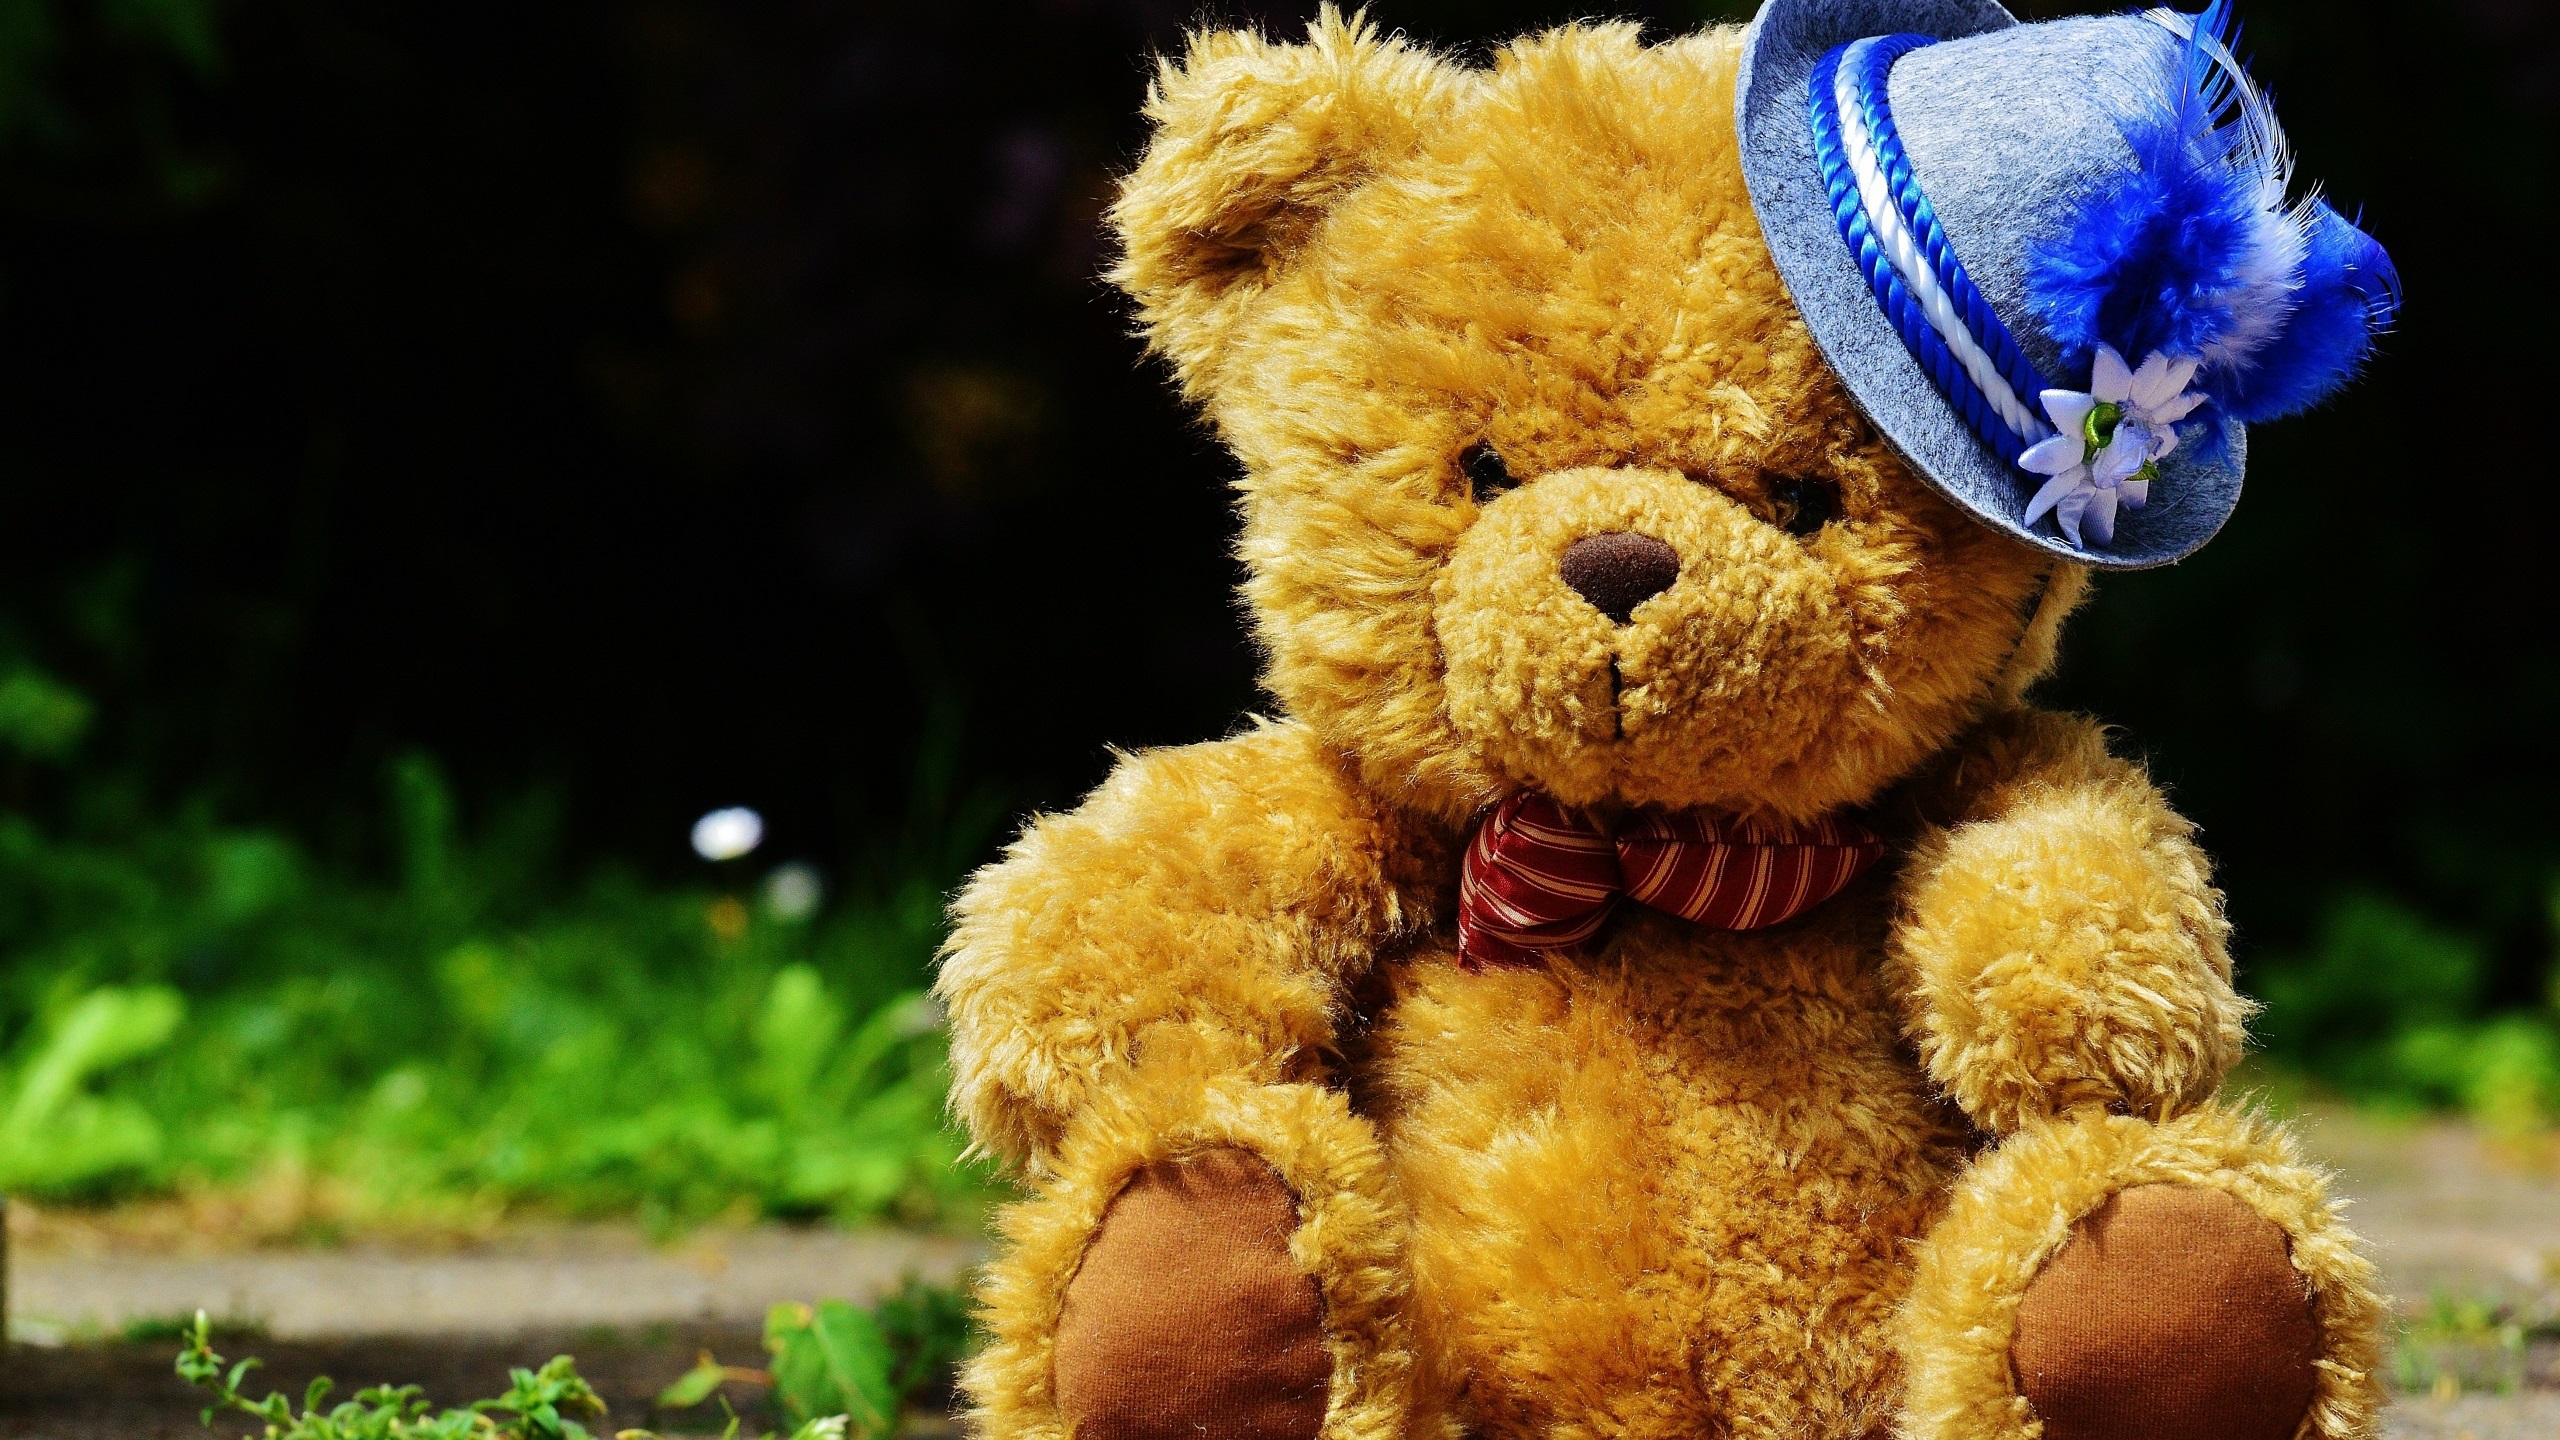 Widescreen - Happy Teddy Day Hd Pic 2019 Download , HD Wallpaper & Backgrounds